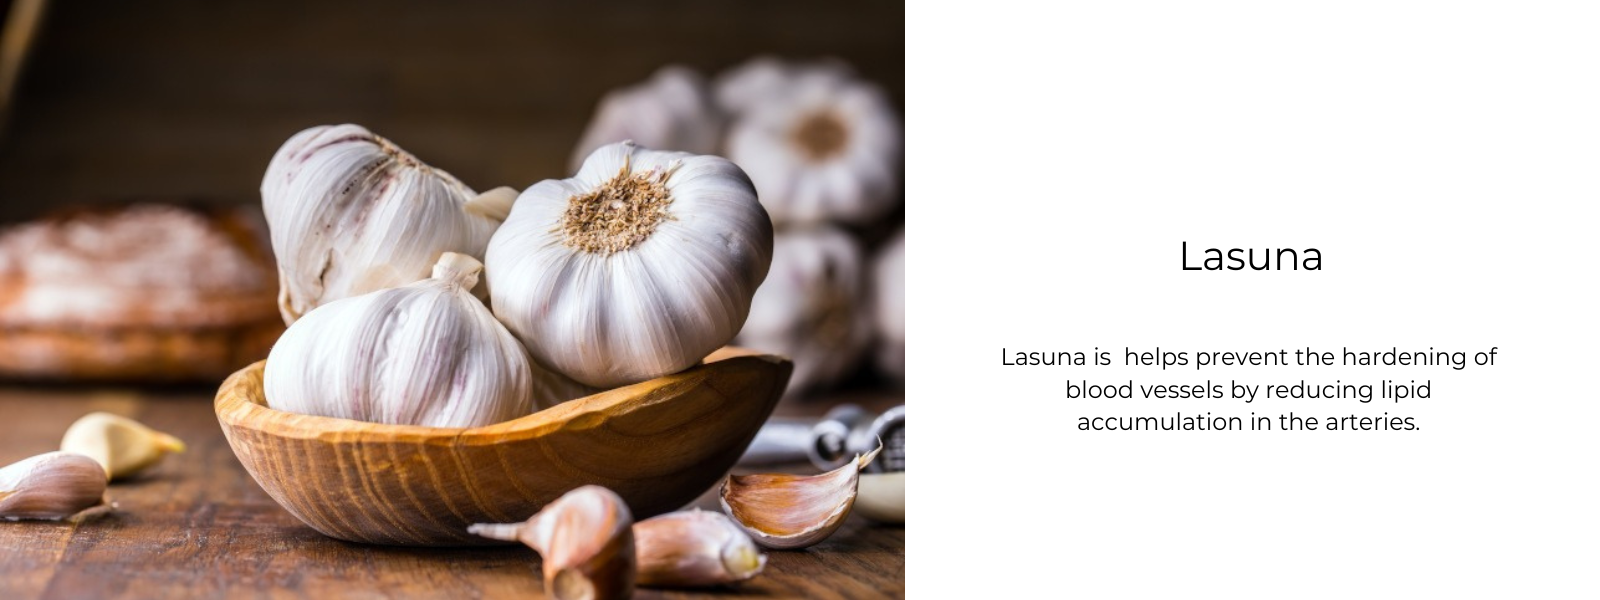 Lasuna - Health Benefits, Uses and Important Facts